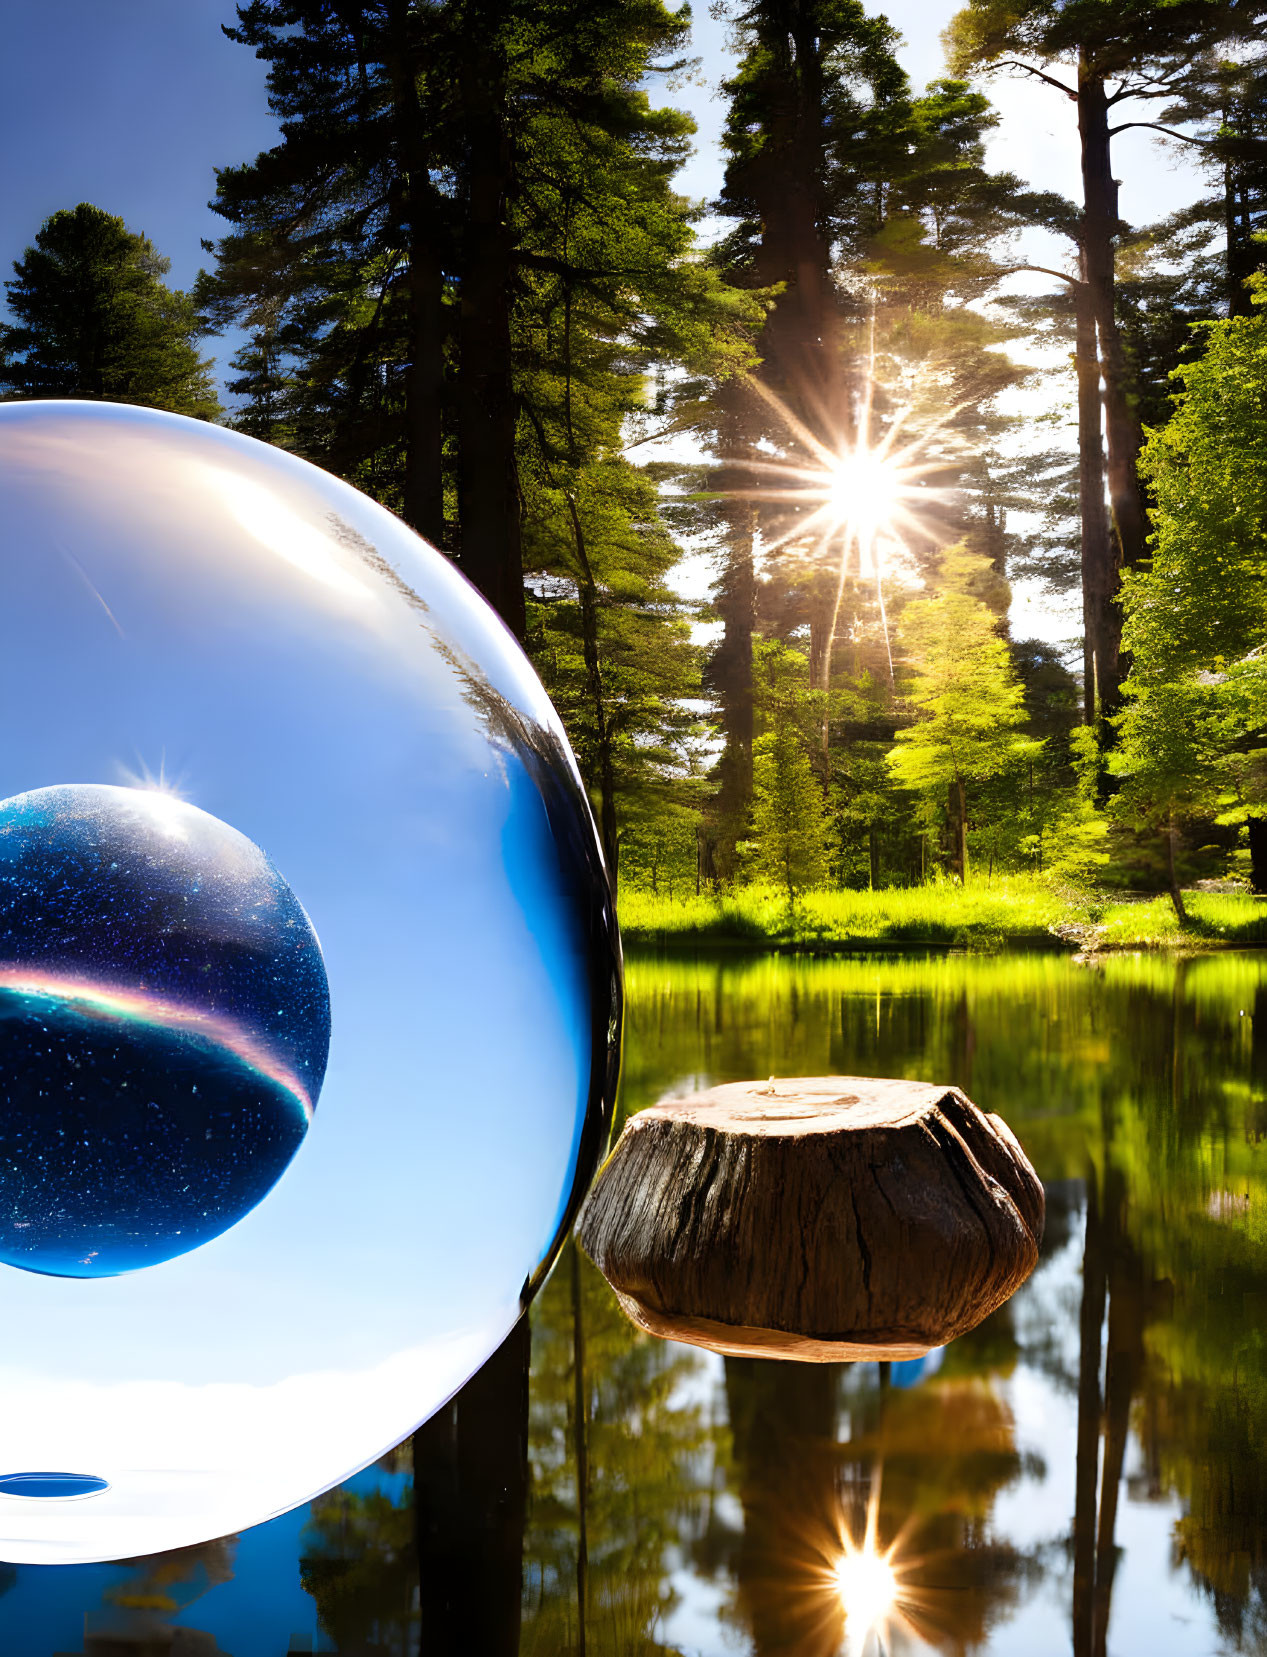 Reflective sphere on stump by tranquil lake in sunlit forest